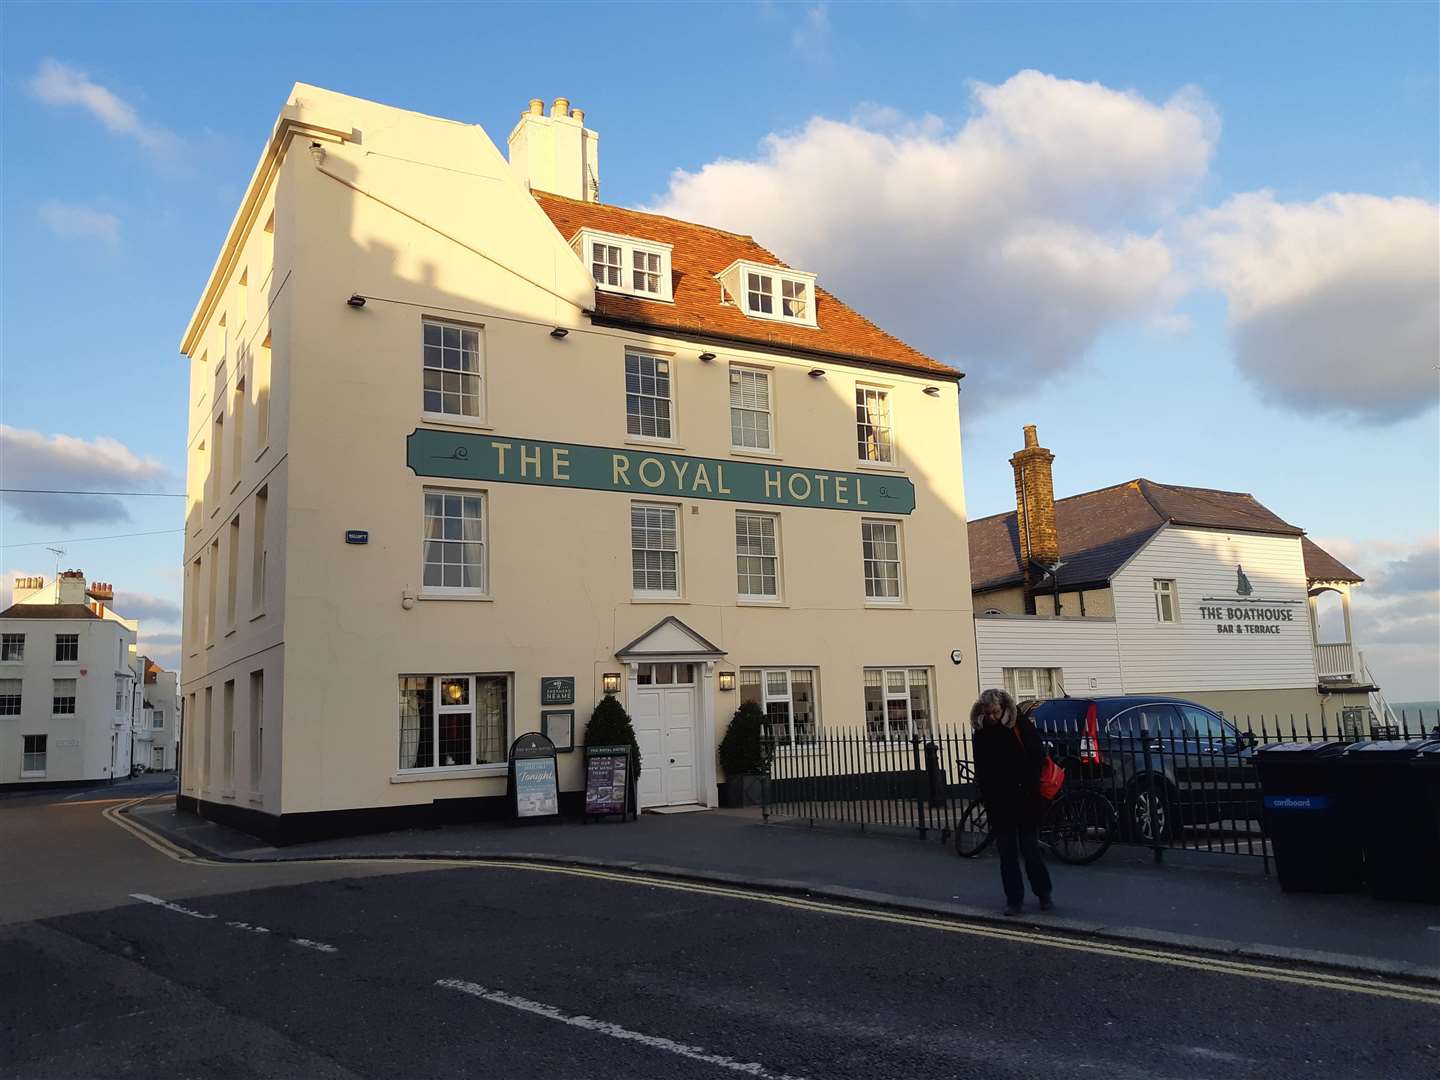 The Royal Hotel will host the Dine in the Dark dinner and auction in Beach Street, Deal